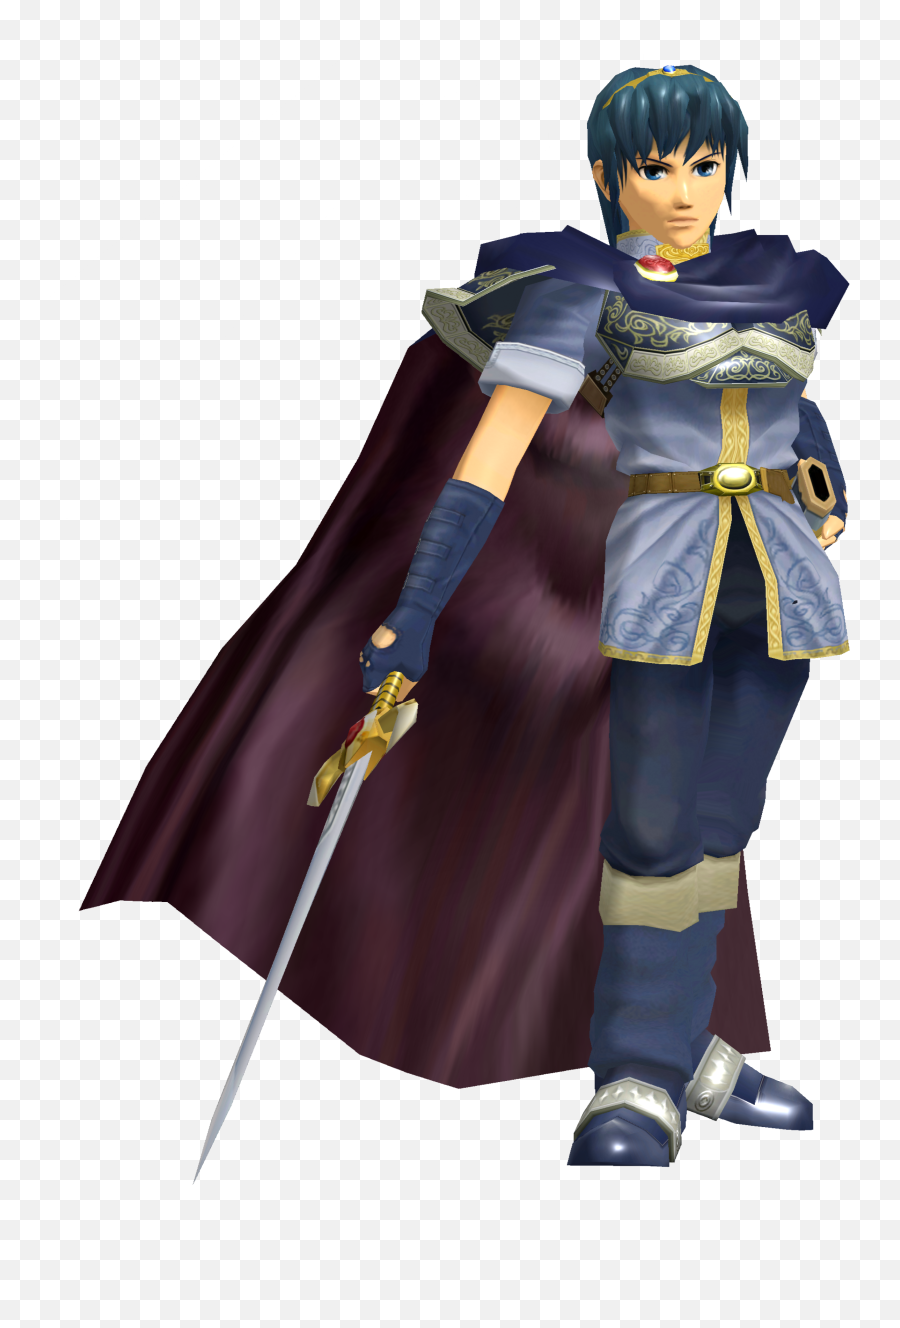 Made A High Resolution Cutout Of Melee - Melee Marth Png Render,Marth Png